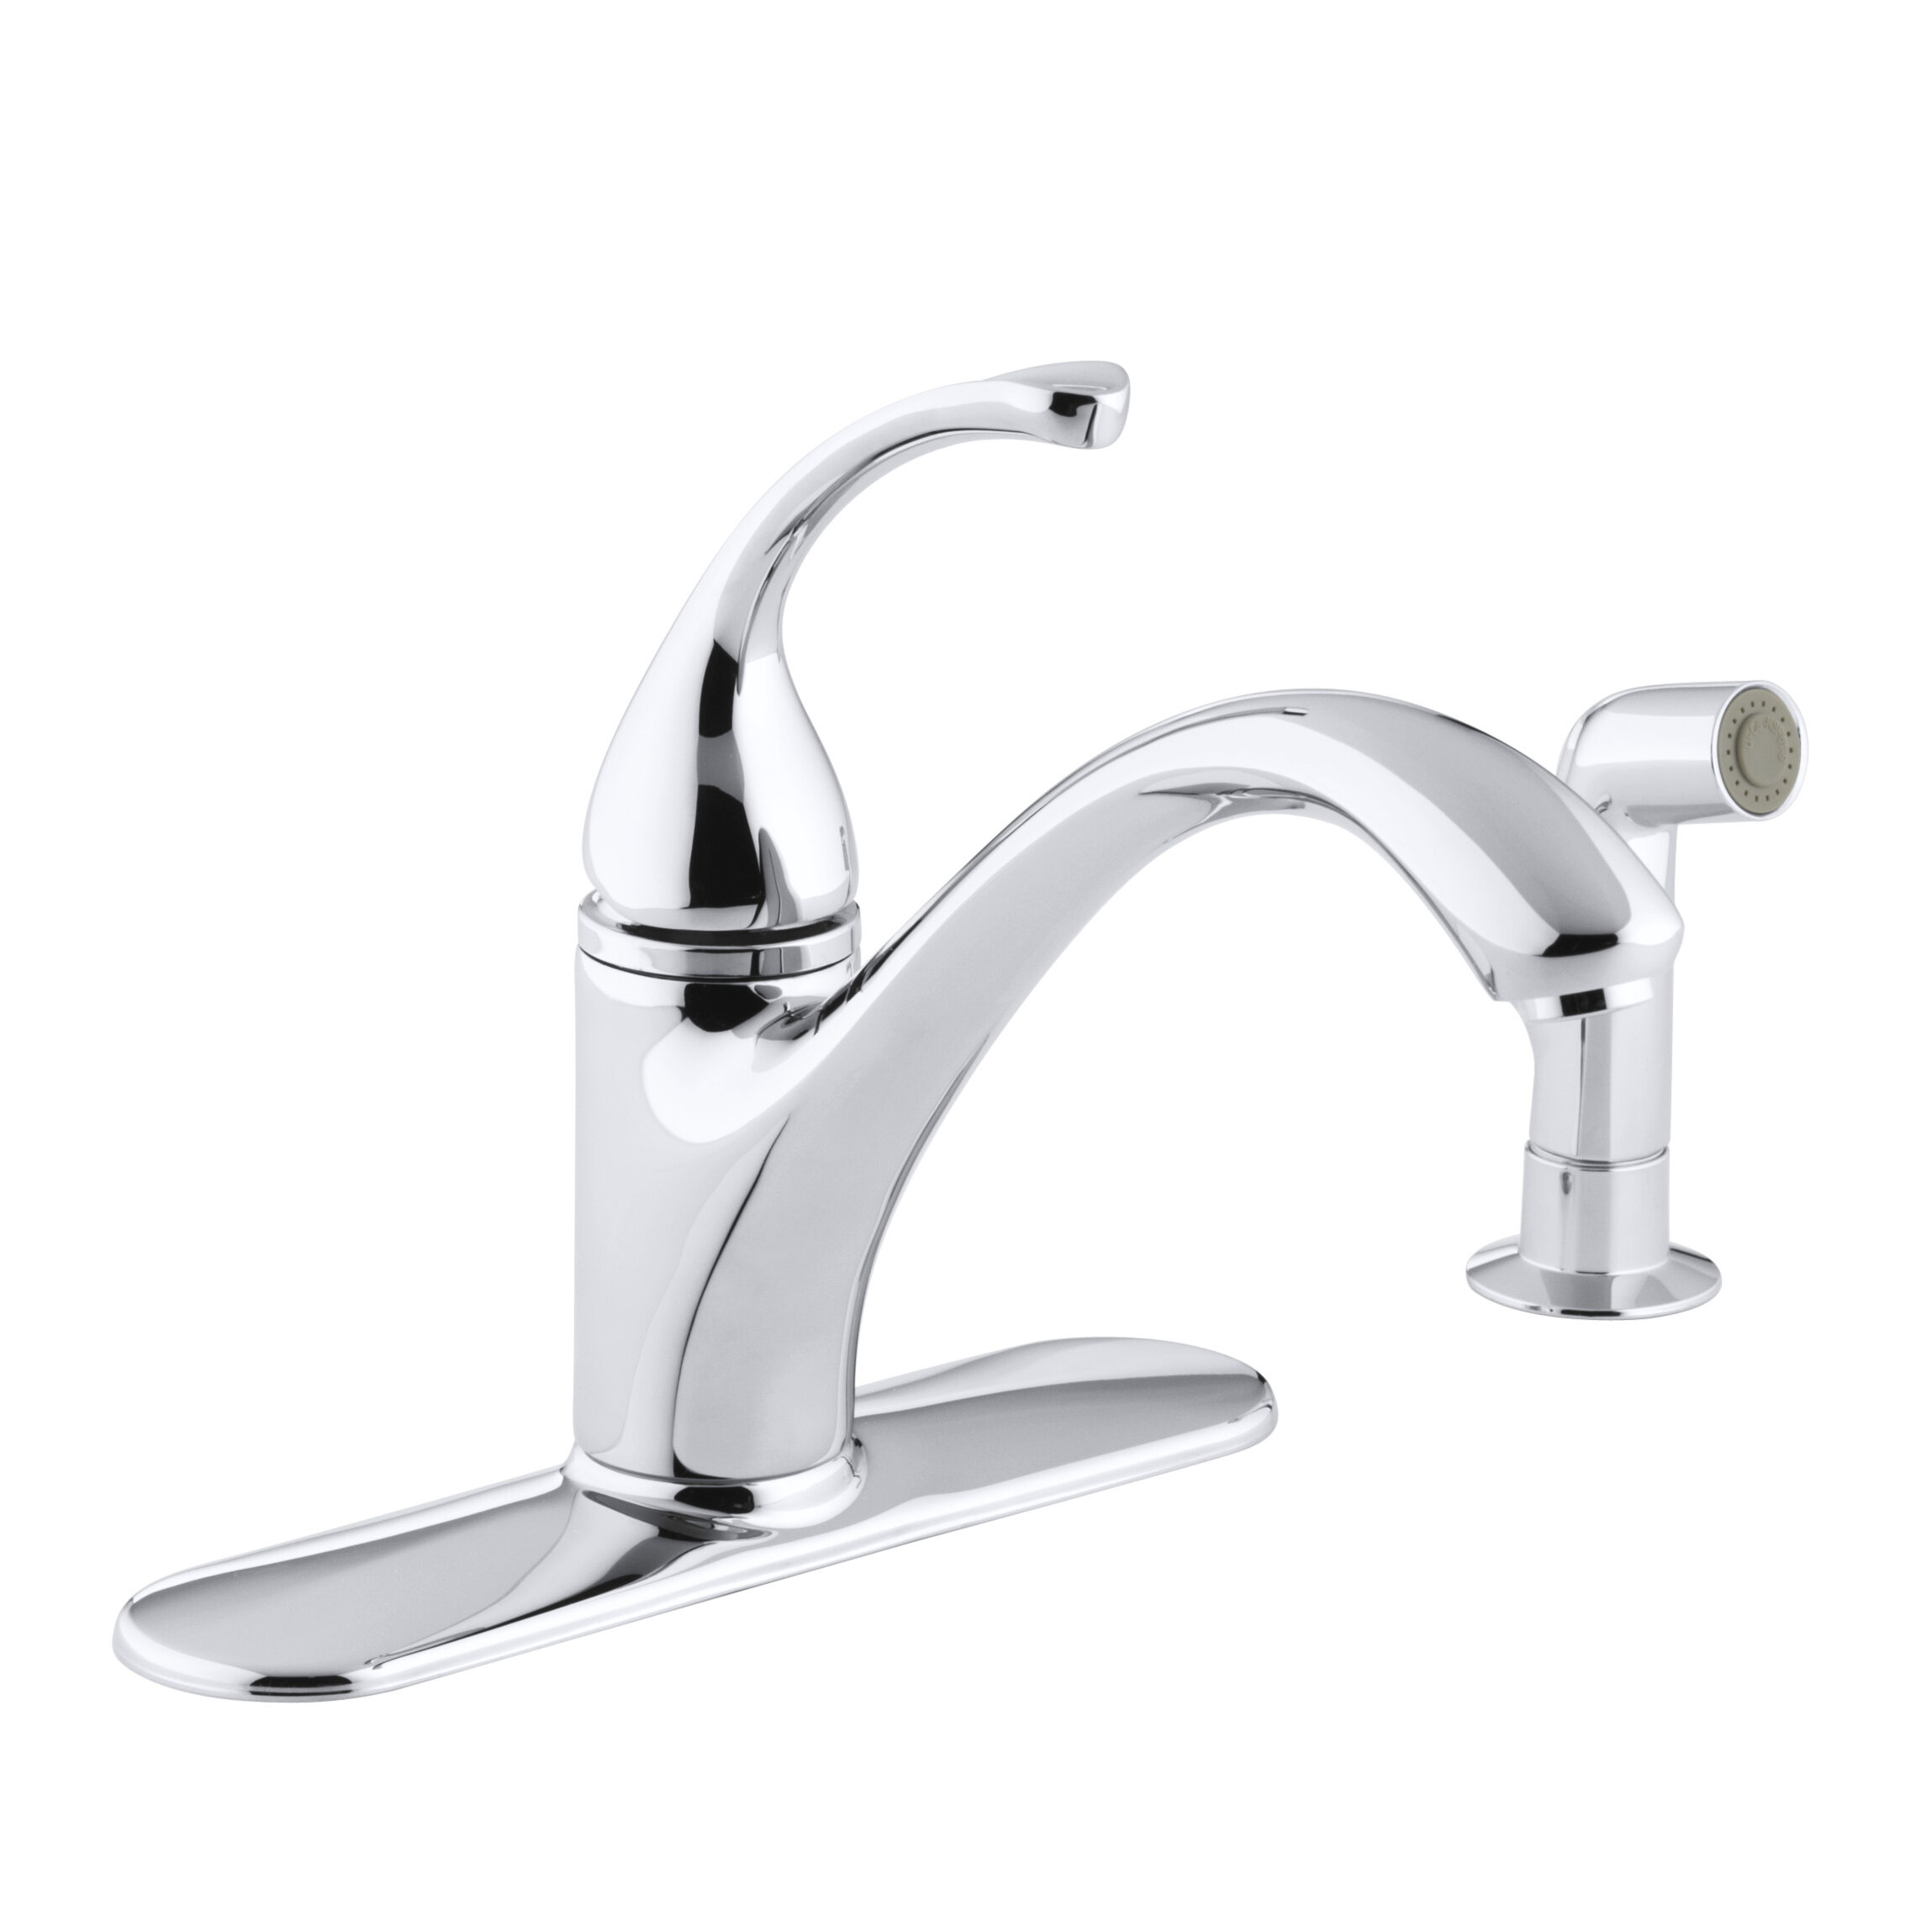 Forte 4 Hole Kitchen Sink Faucet With 9 1 16 Spout Matching Finish Sidespray